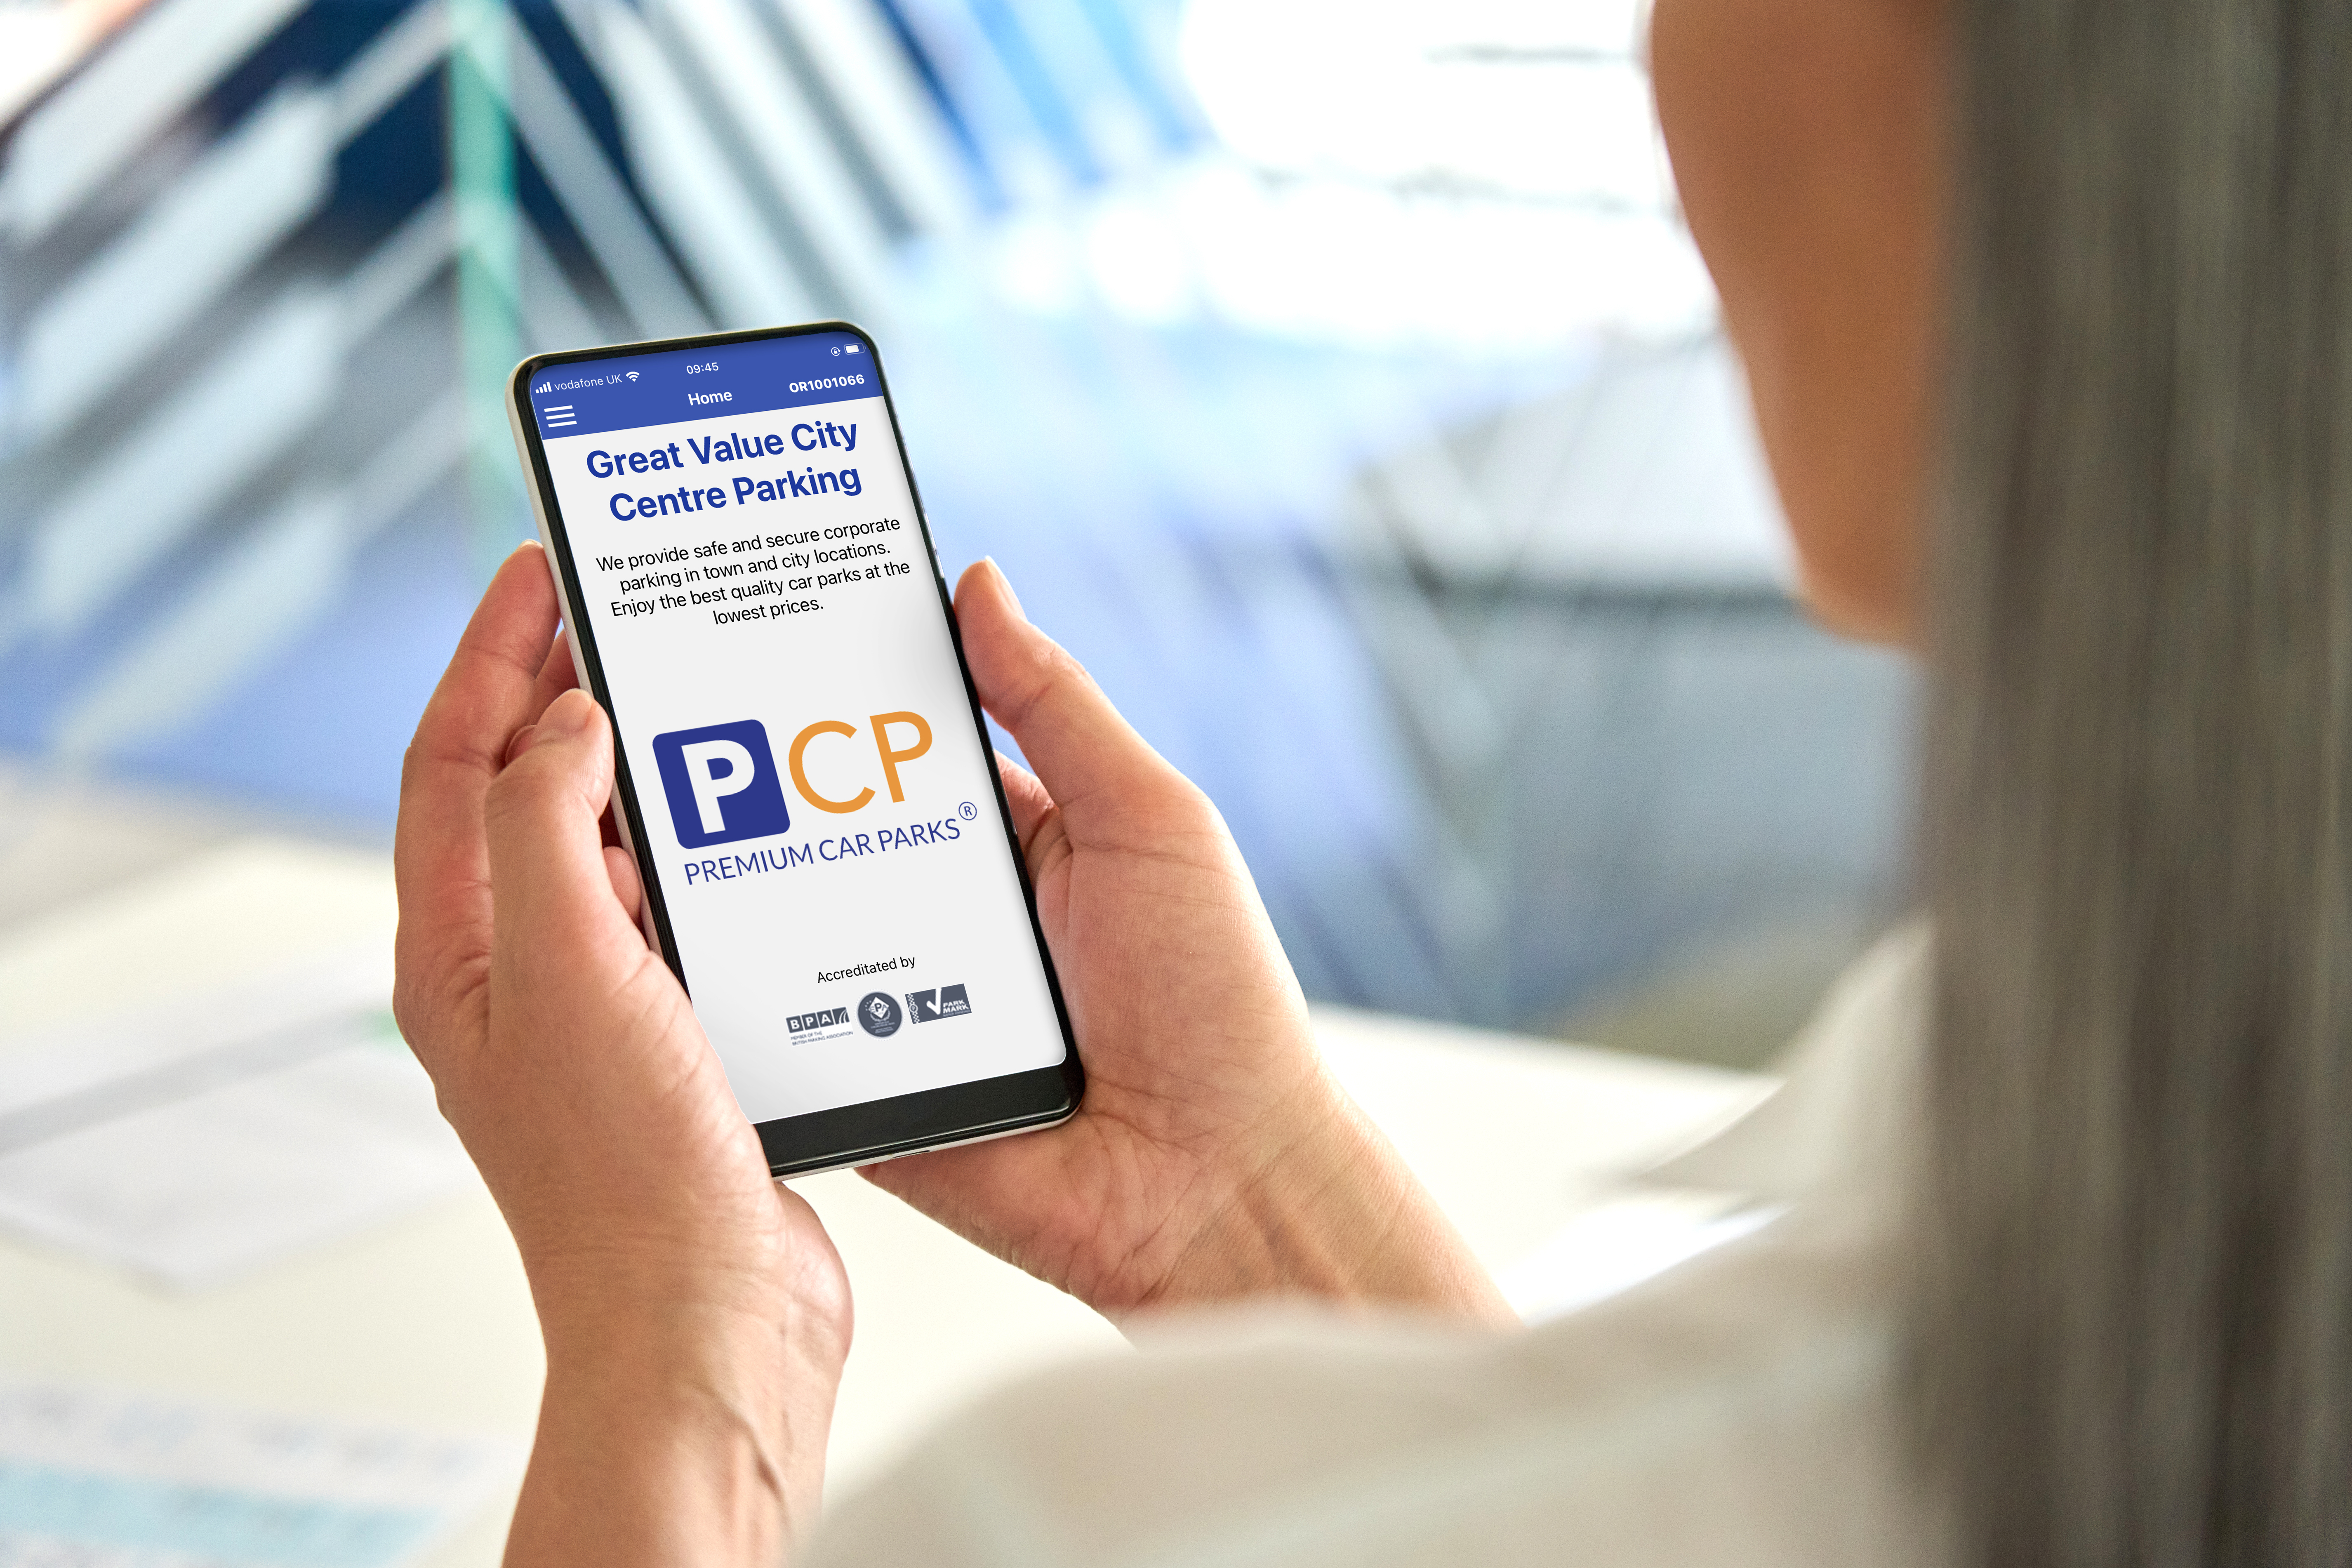 Have You Downloaded Our Free Premium Car Parks App Yet?